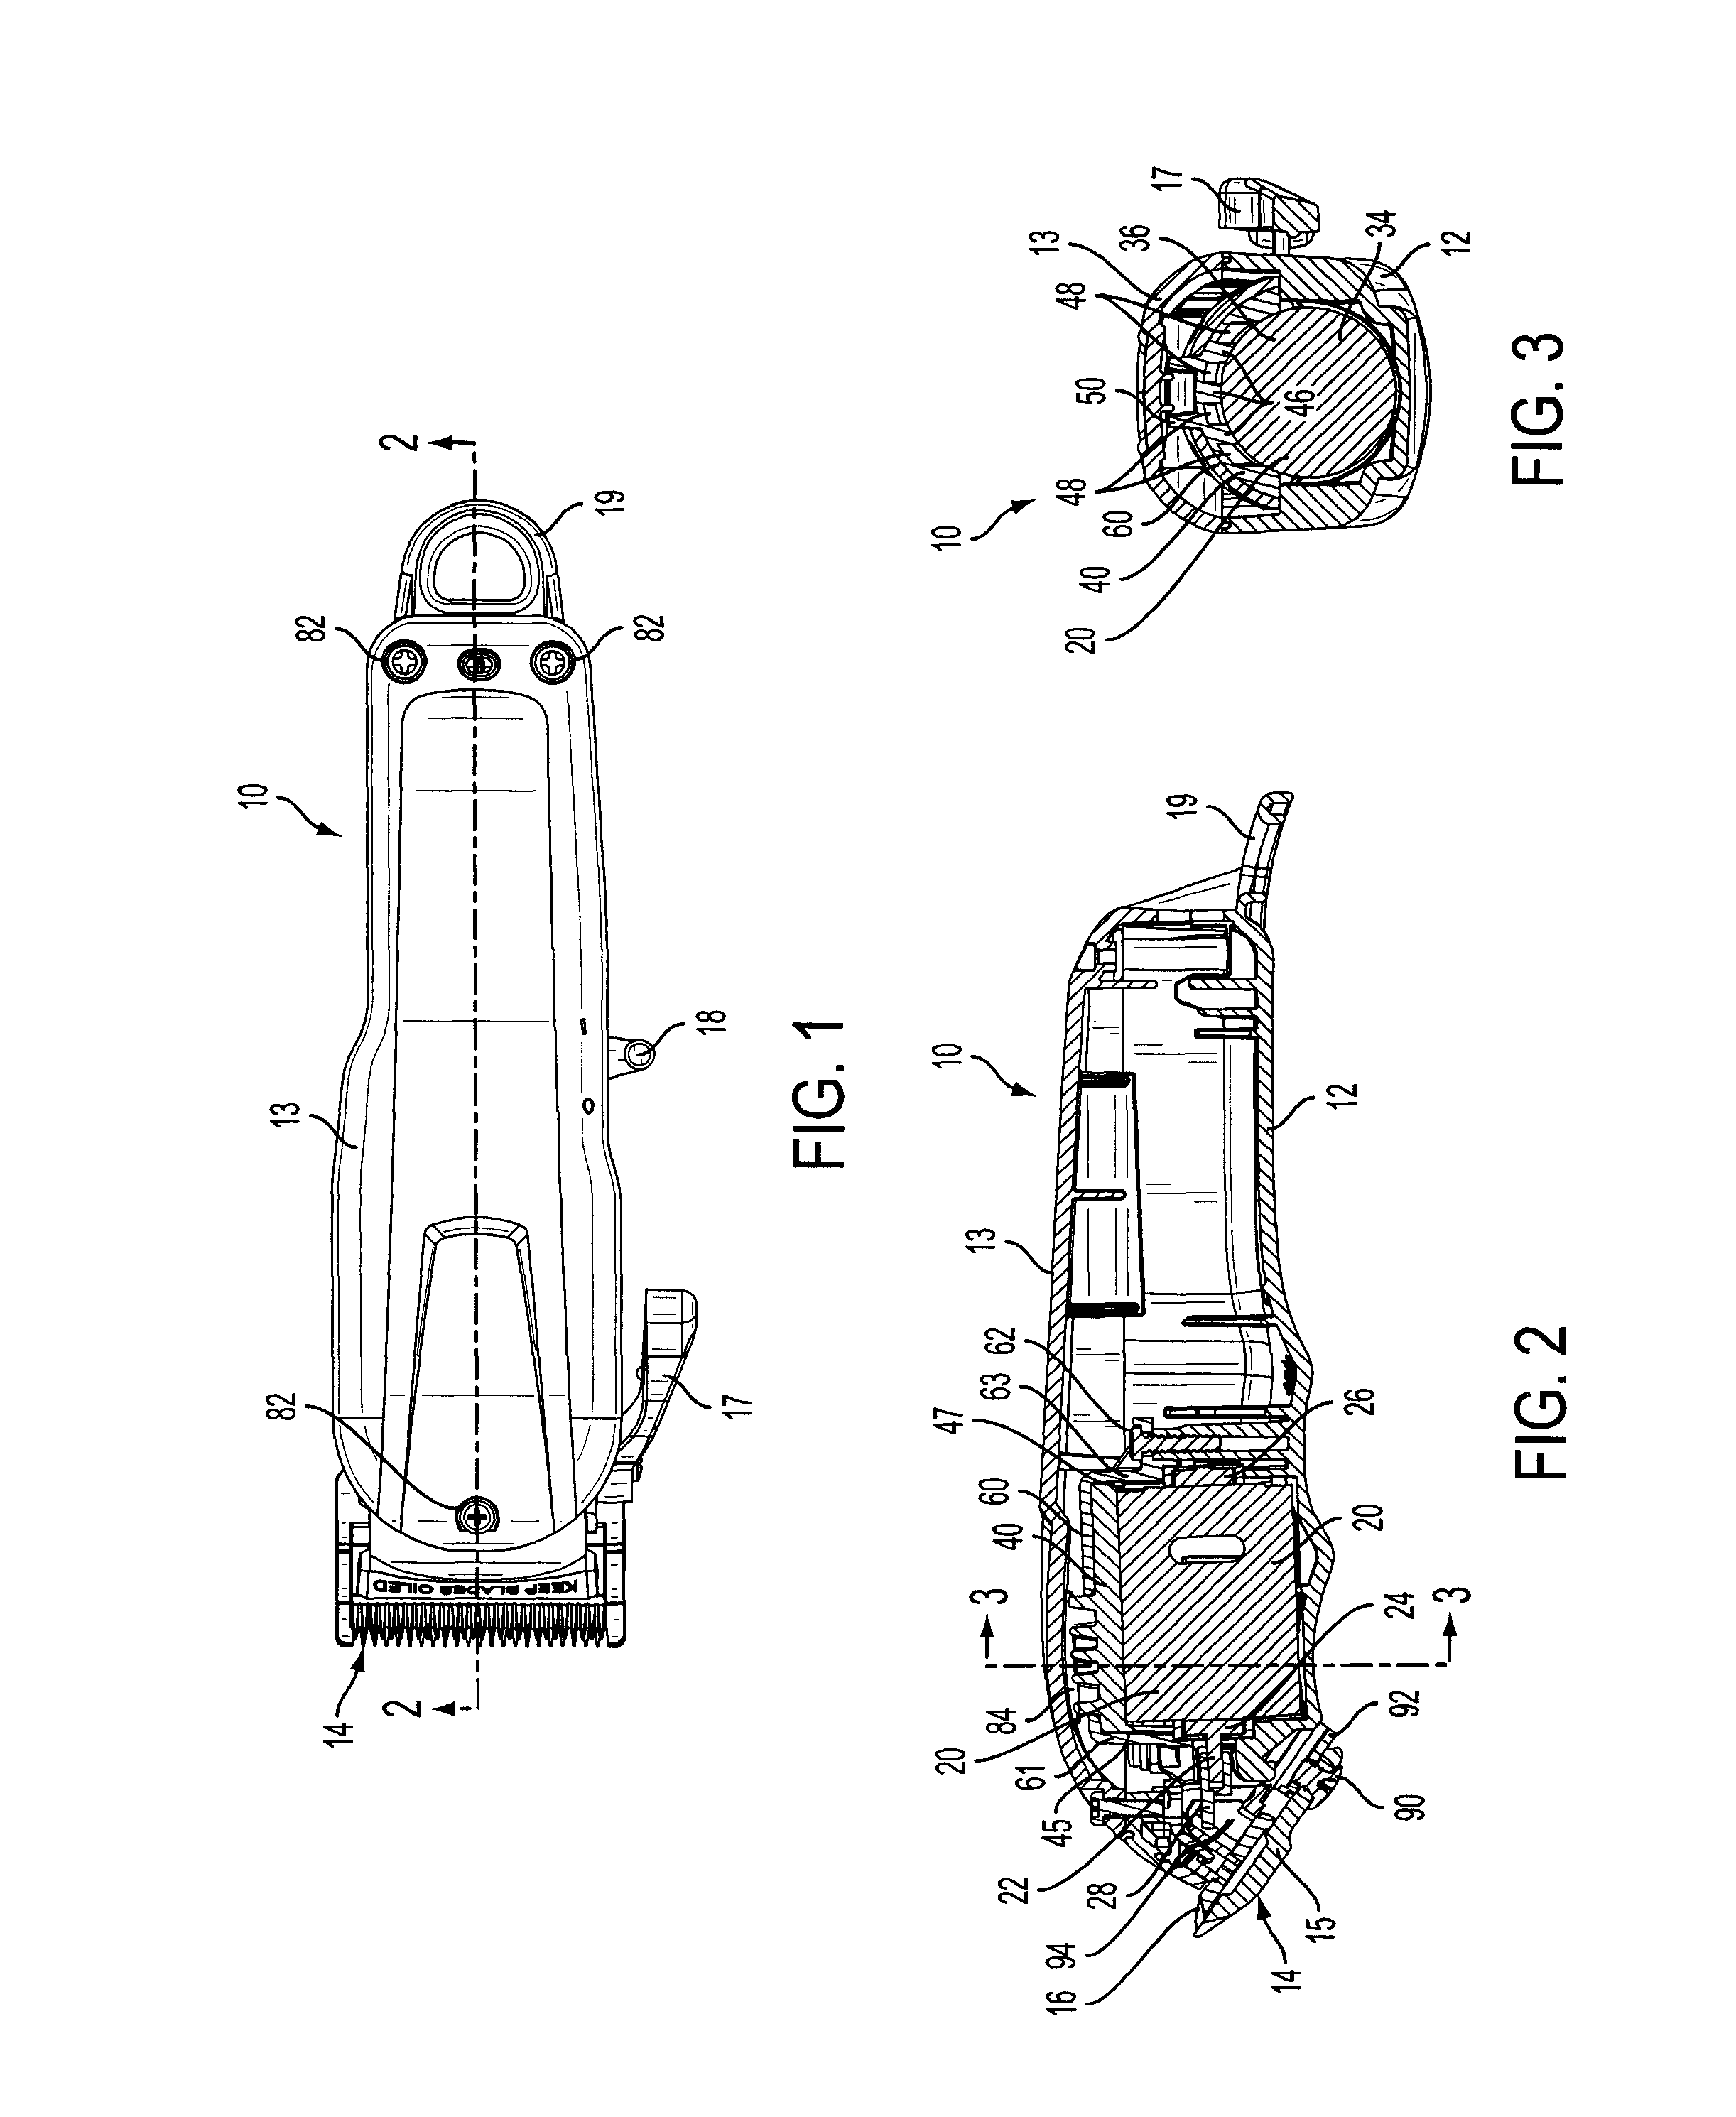 Hair clipper with a rotary motor vibration and noise damper